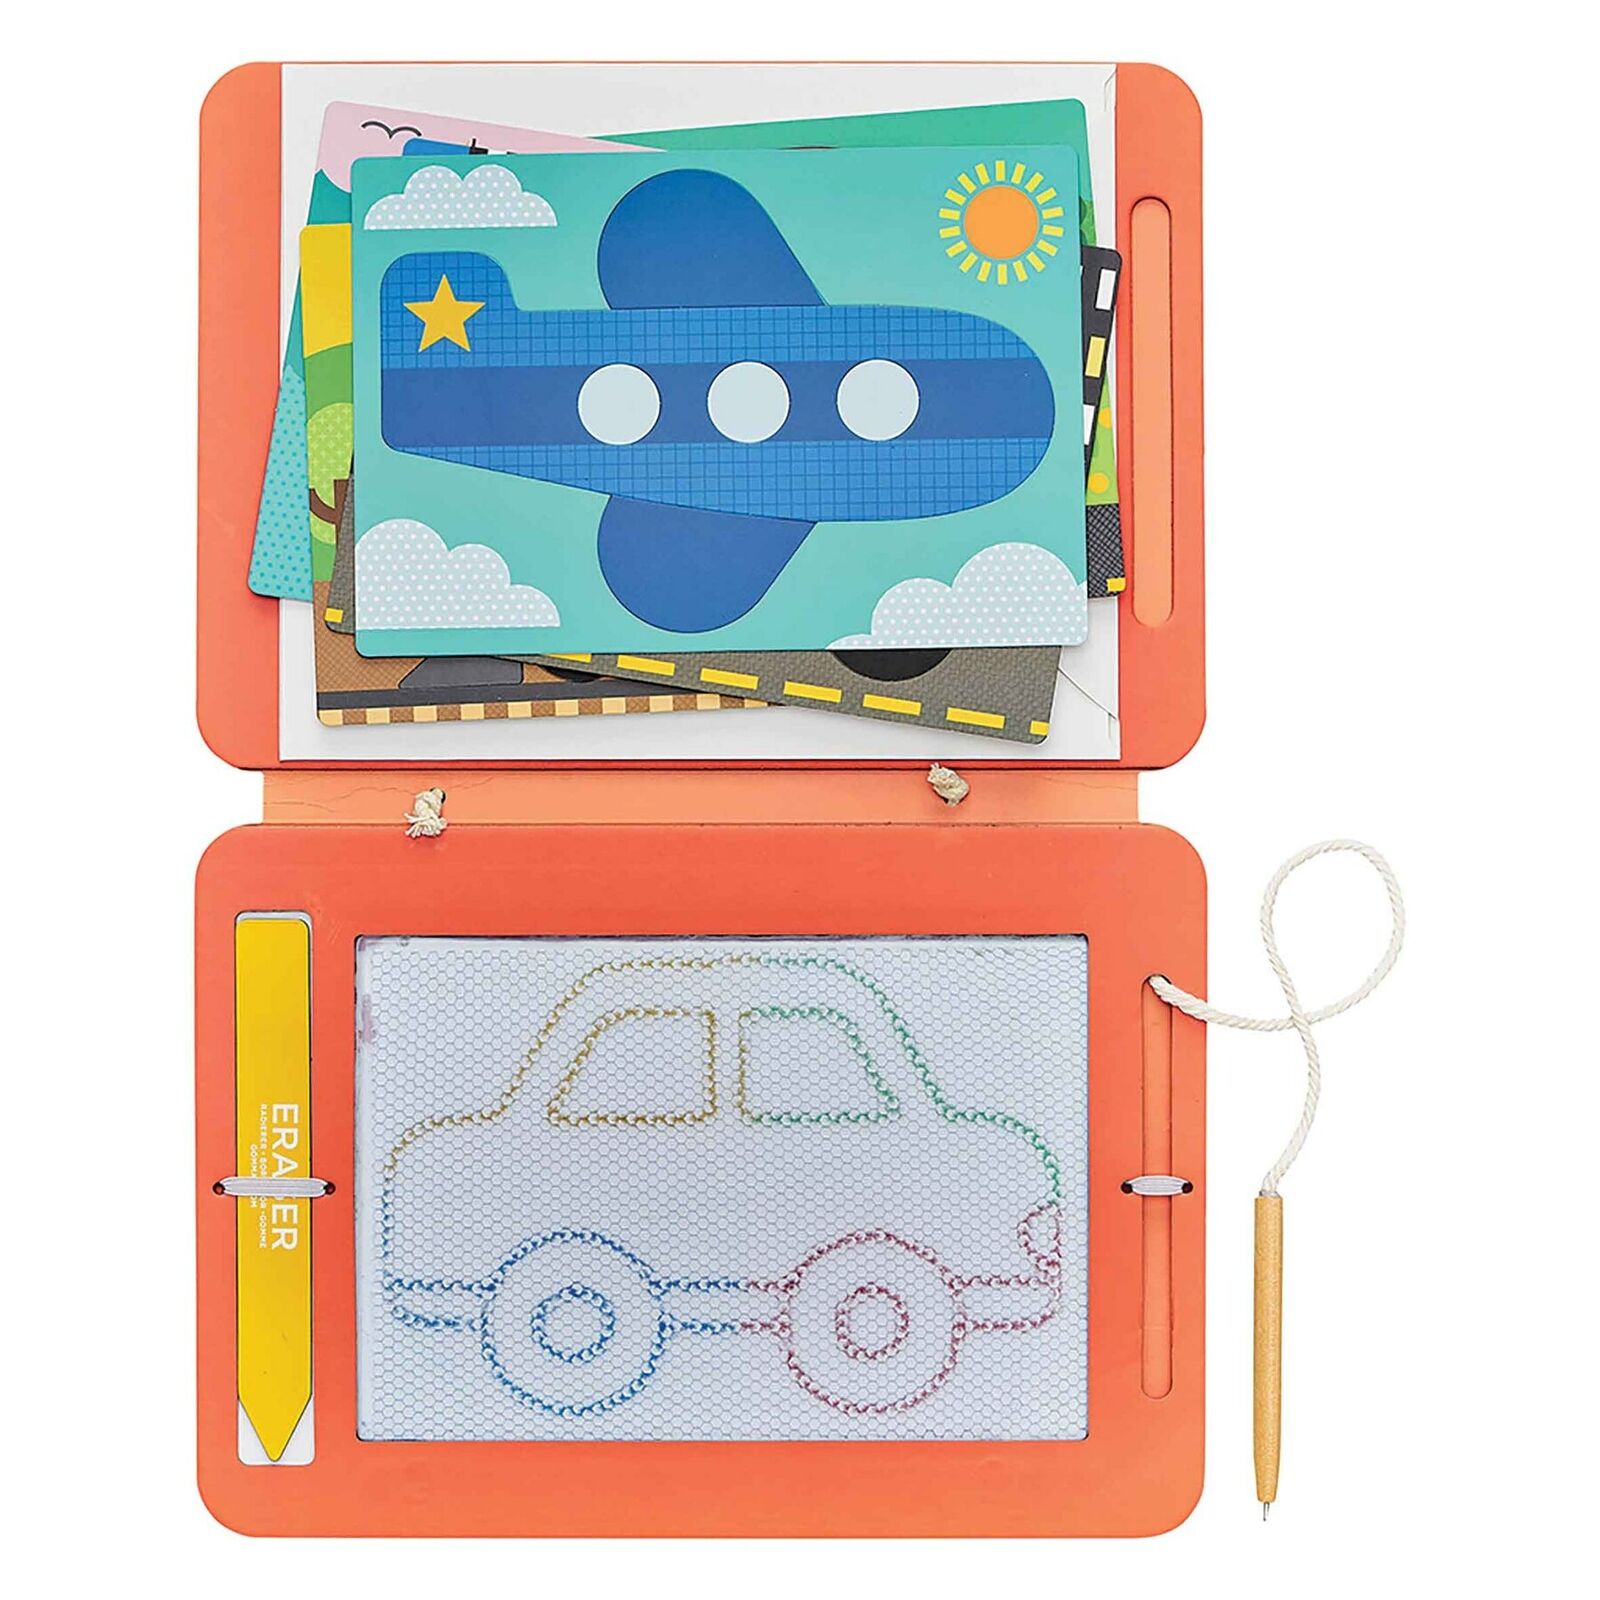 Magic Sketch and Stencil On the Go| Educational Toys